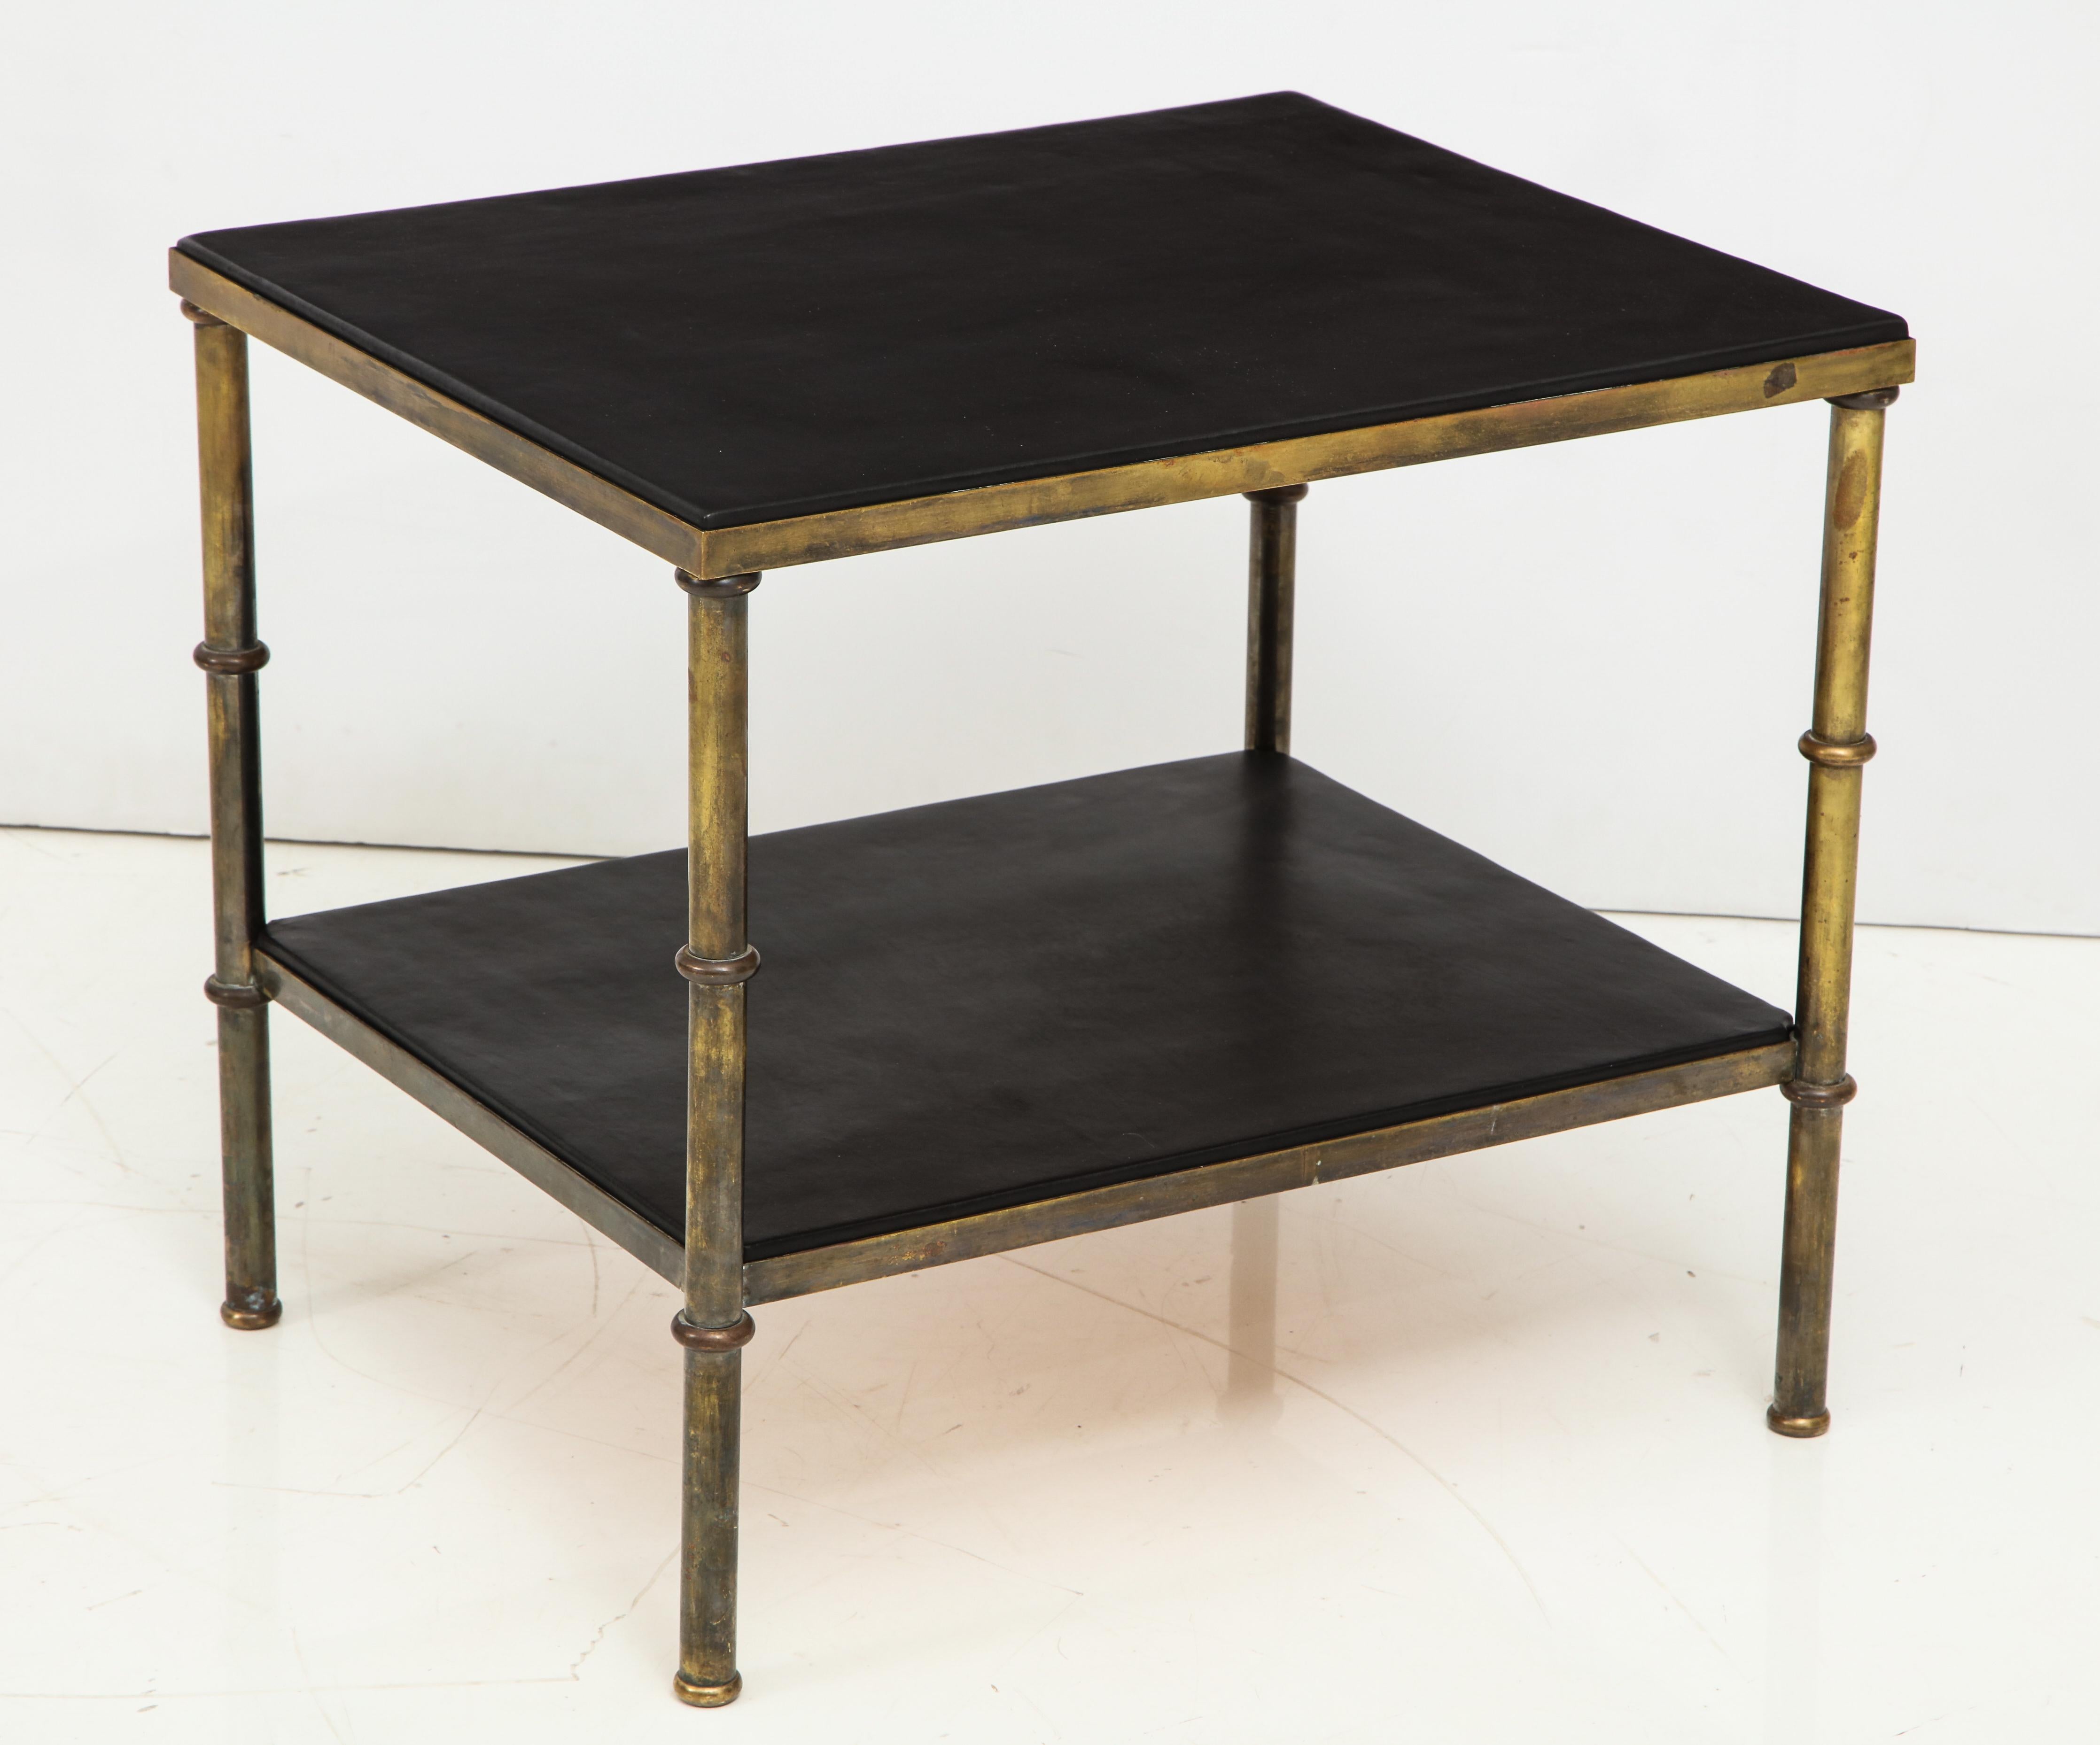 Attributed to Jacques Quinet
Patinated bronze; fresh black leather tops
Rare.
 